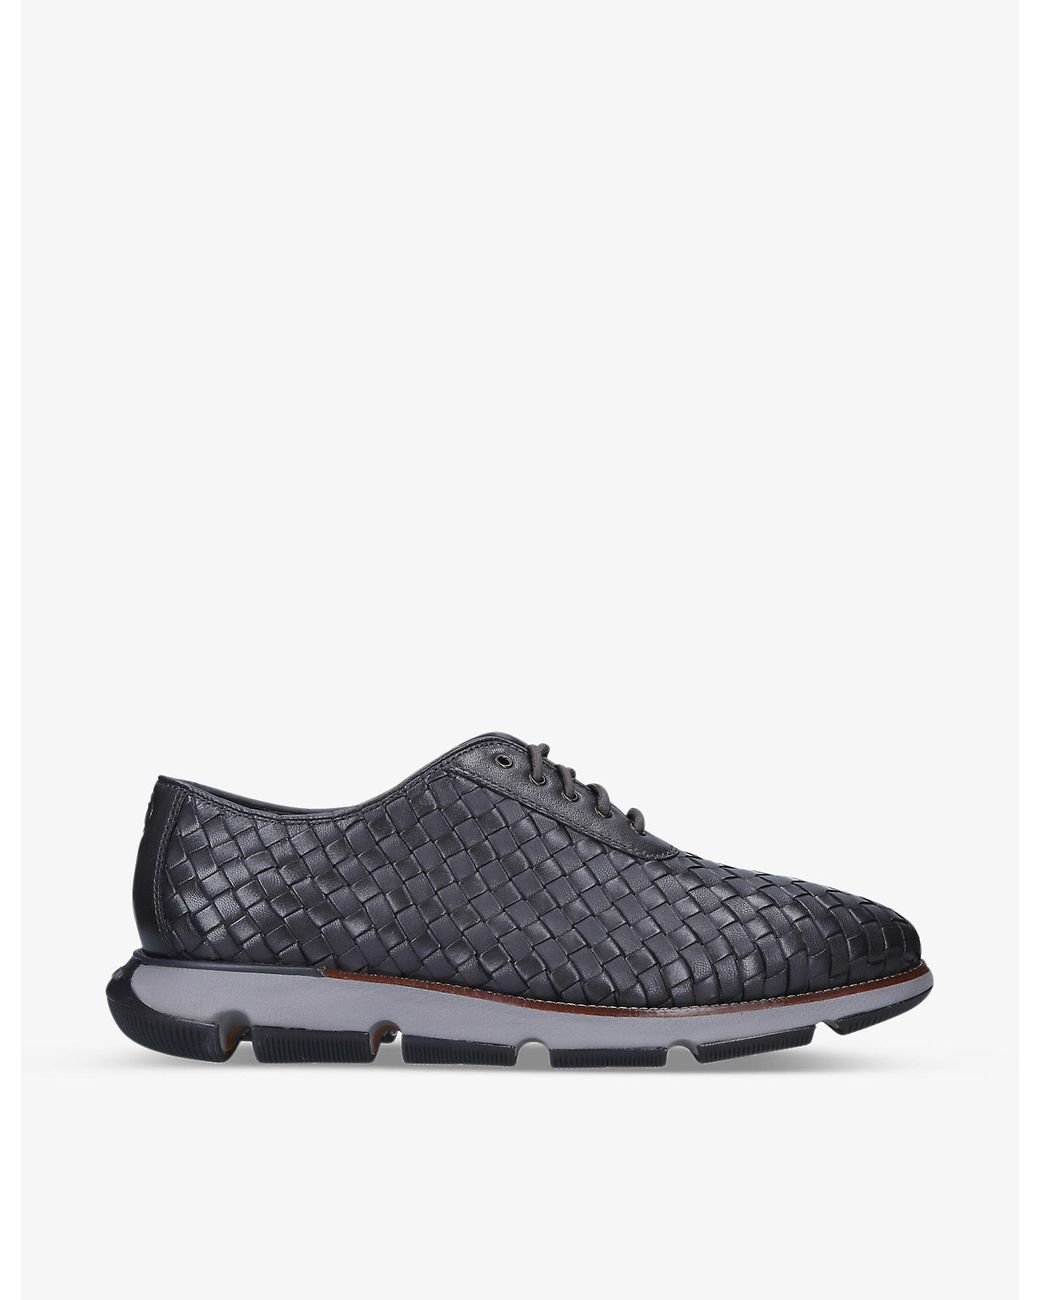 Cole Haan 4.zerogrand Woven Leather Oxford Shoes in Grey/Dark (Grey ...